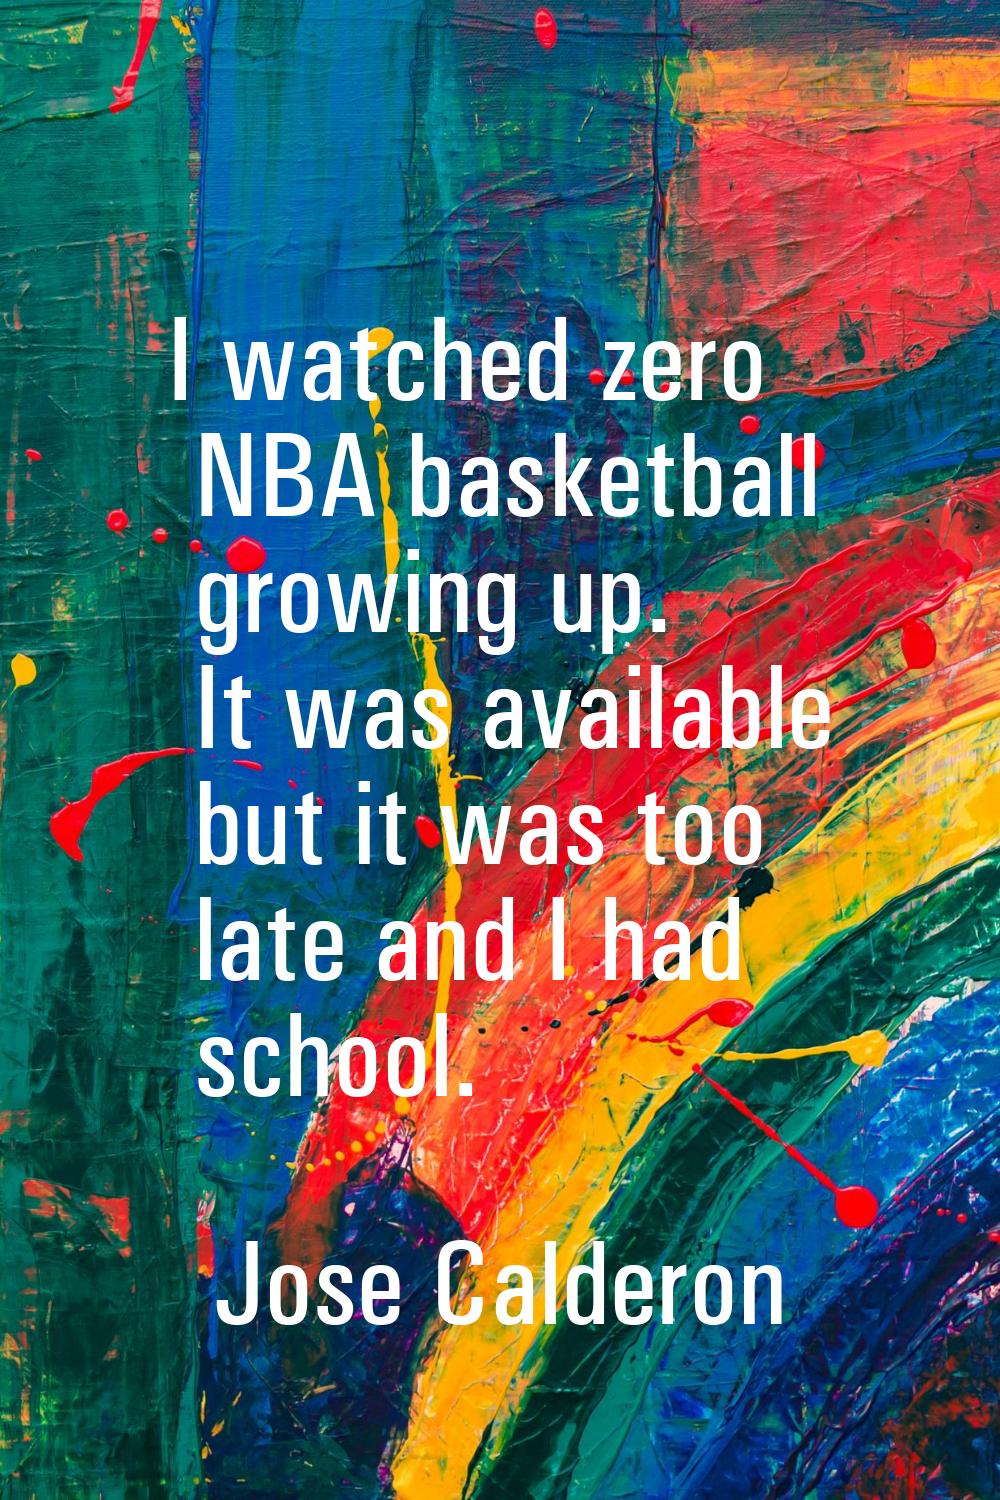 I watched zero NBA basketball growing up. It was available but it was too late and I had school.